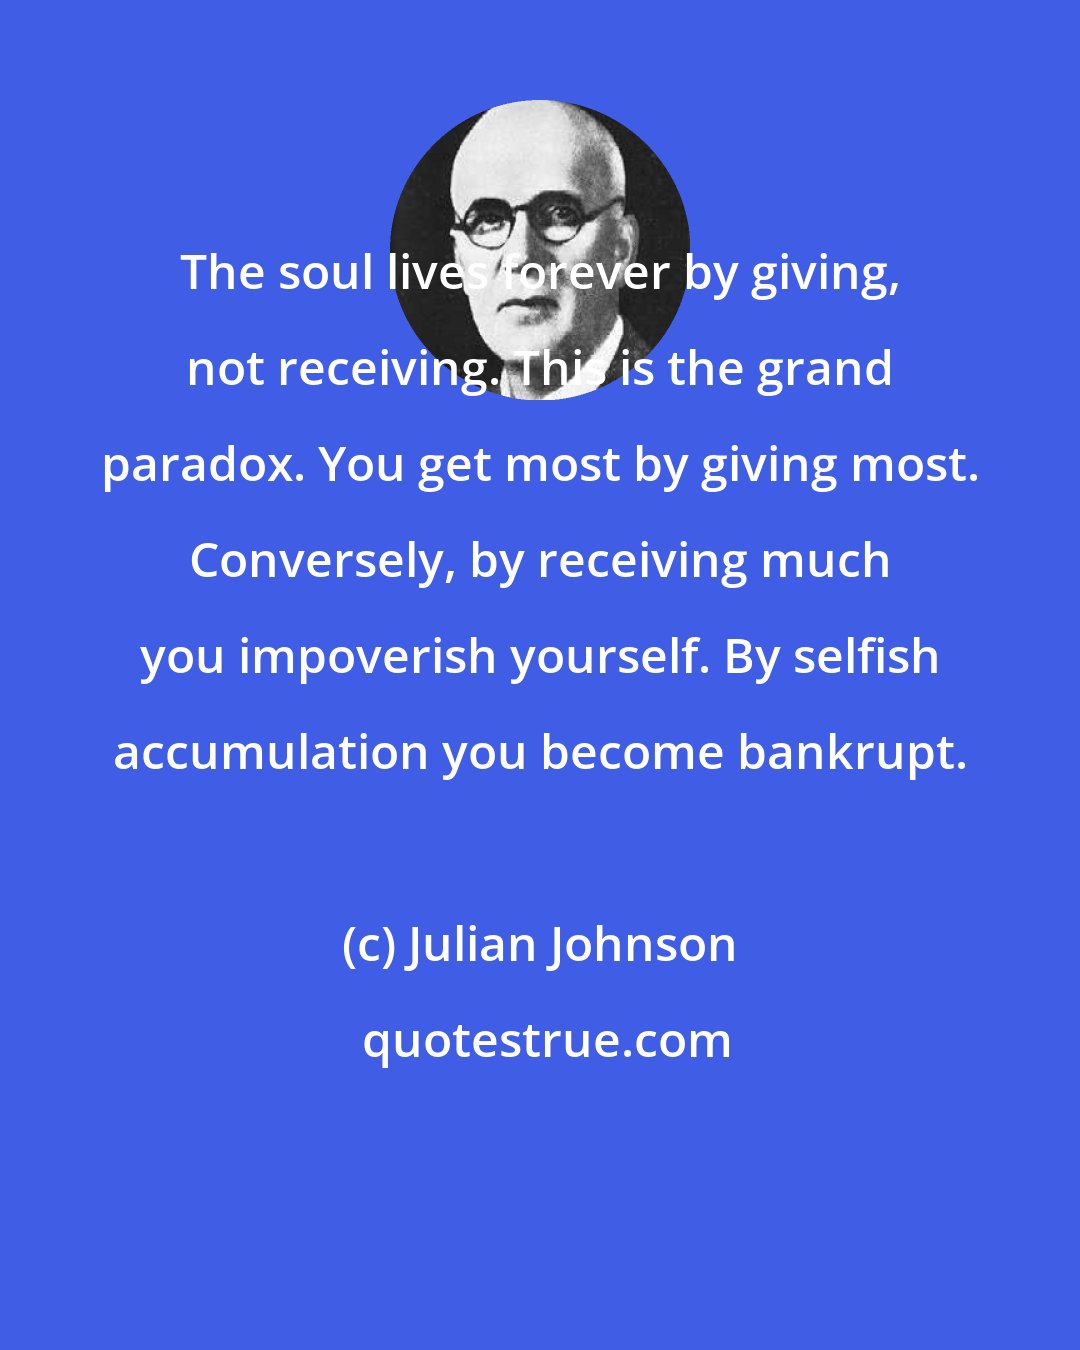 Julian Johnson: The soul lives forever by giving, not receiving. This is the grand paradox. You get most by giving most. Conversely, by receiving much you impoverish yourself. By selfish accumulation you become bankrupt.